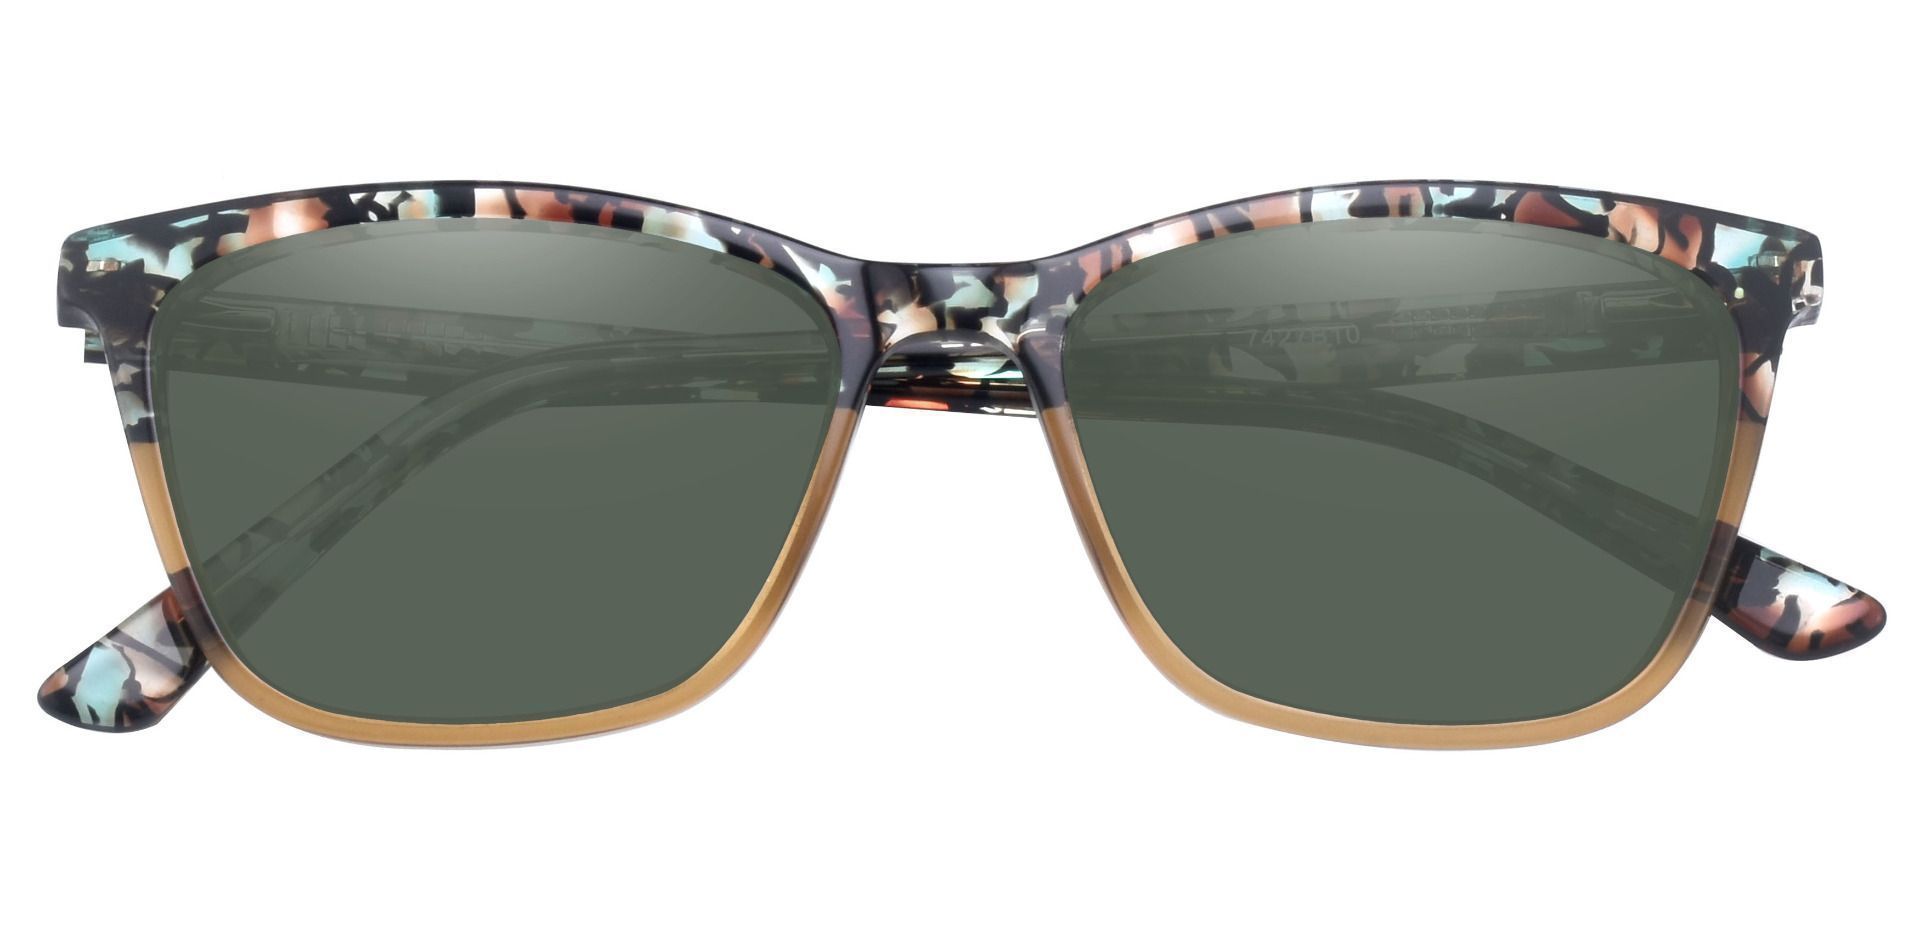 Concord Cat Eye Lined Bifocal Sunglasses - Brown Frame With Green ...